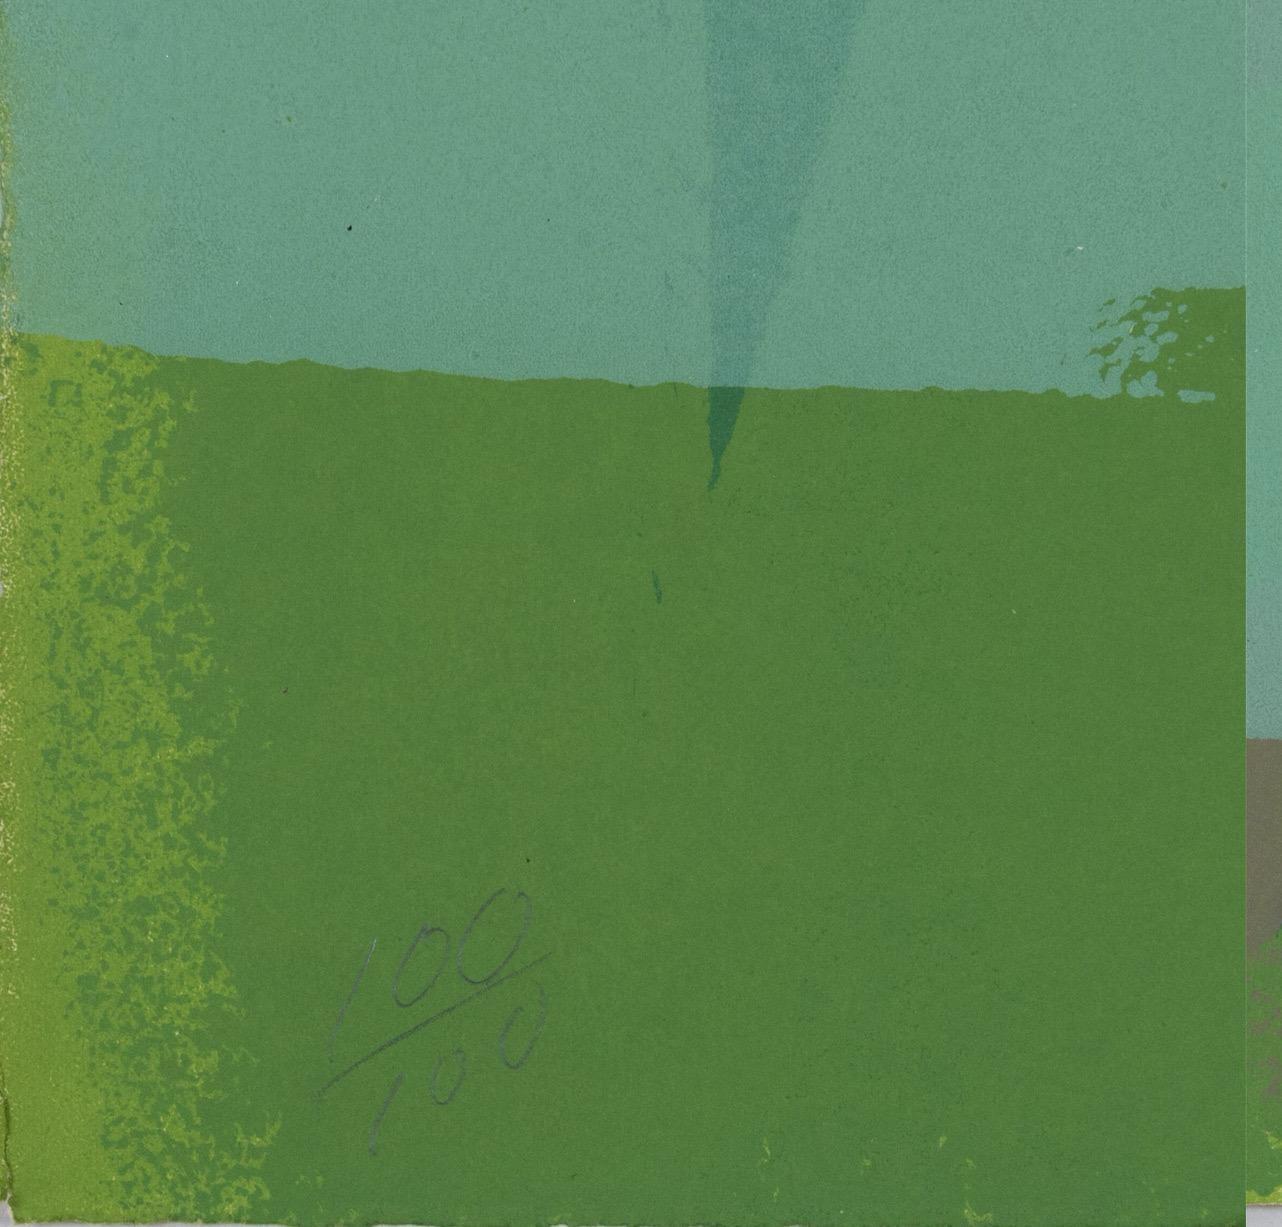 Edward Avedisian (1936-2007), Green Gold, 1969

Lithograph in color on woven paper.
Signed, dated and numbered in pencil.
Edition 100/100

Dimensions:
22 1/4 inches L x 30 1/4 inches H, unframed

Provenance: 
Brooke Alexander Gallery, NY